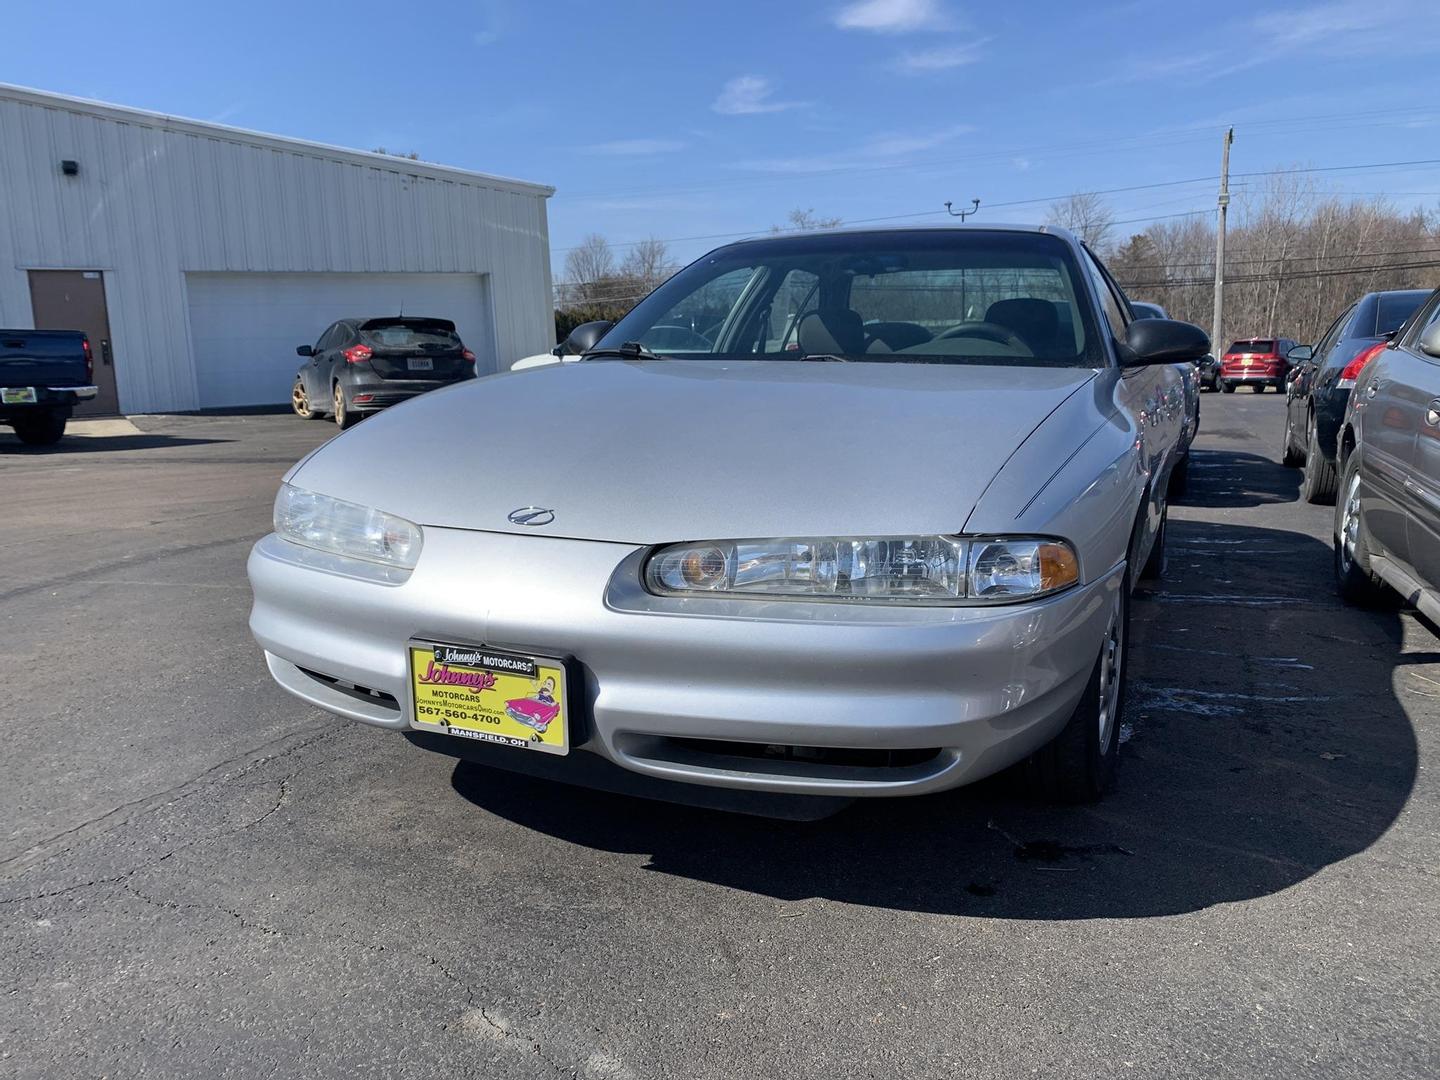 Used 2001 Oldsmobile Intrigue's nationwide for sale - MotorCloud